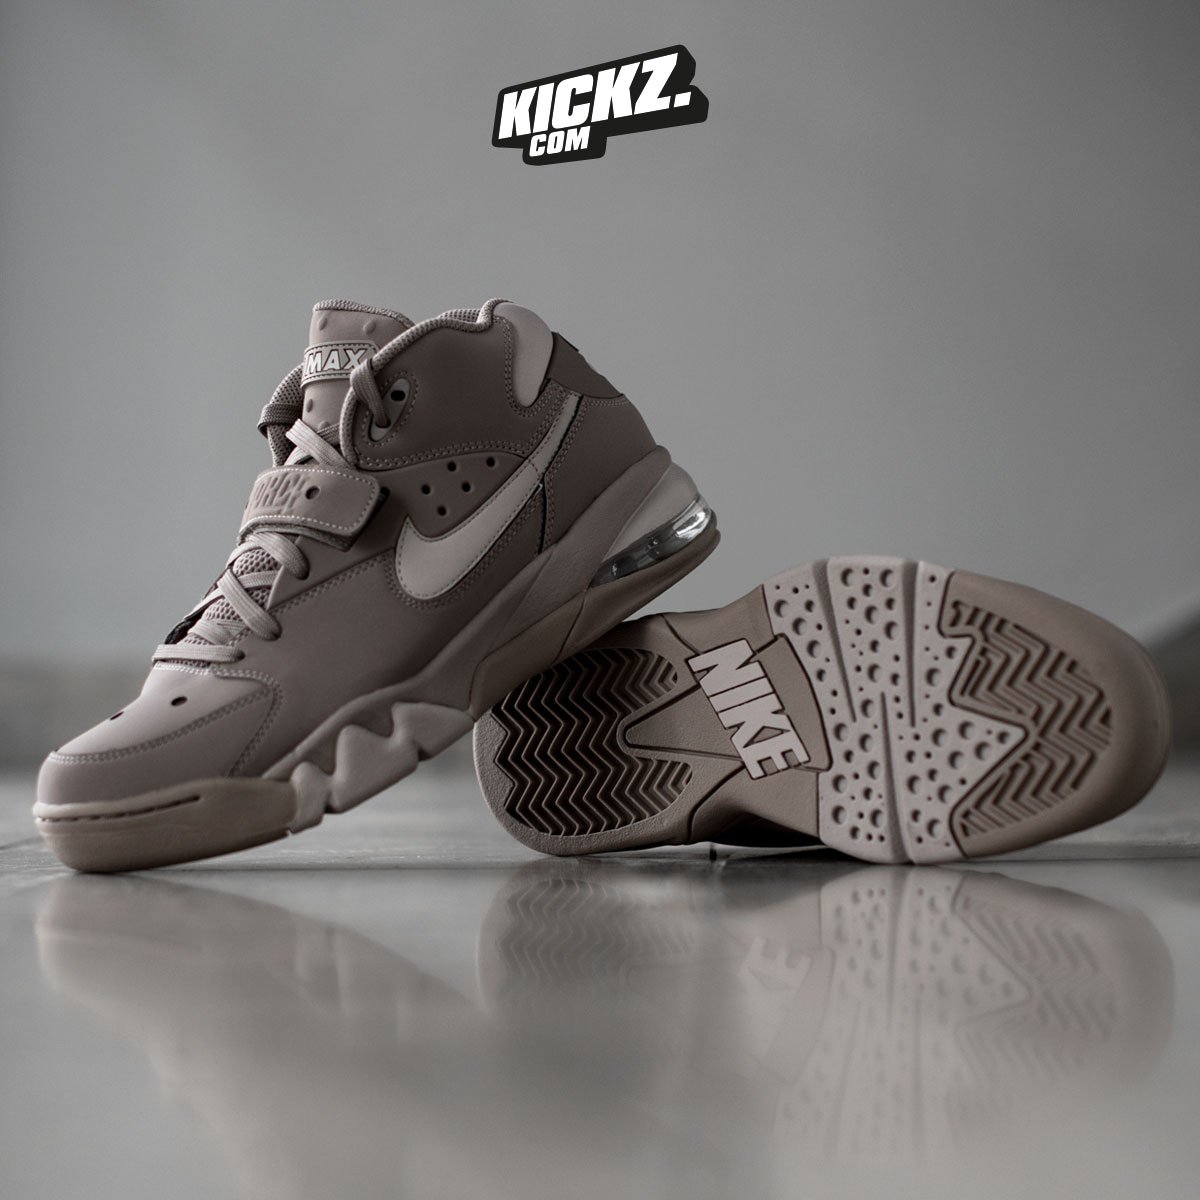 Preguntarse Perforar Diplomático KICKZ on Twitter: "🏀1993🏀 Charles Barkley used to hoop in them back in  1993 and now the Nike Air Force Max is back, ready to hit the streets. Get  them now in '